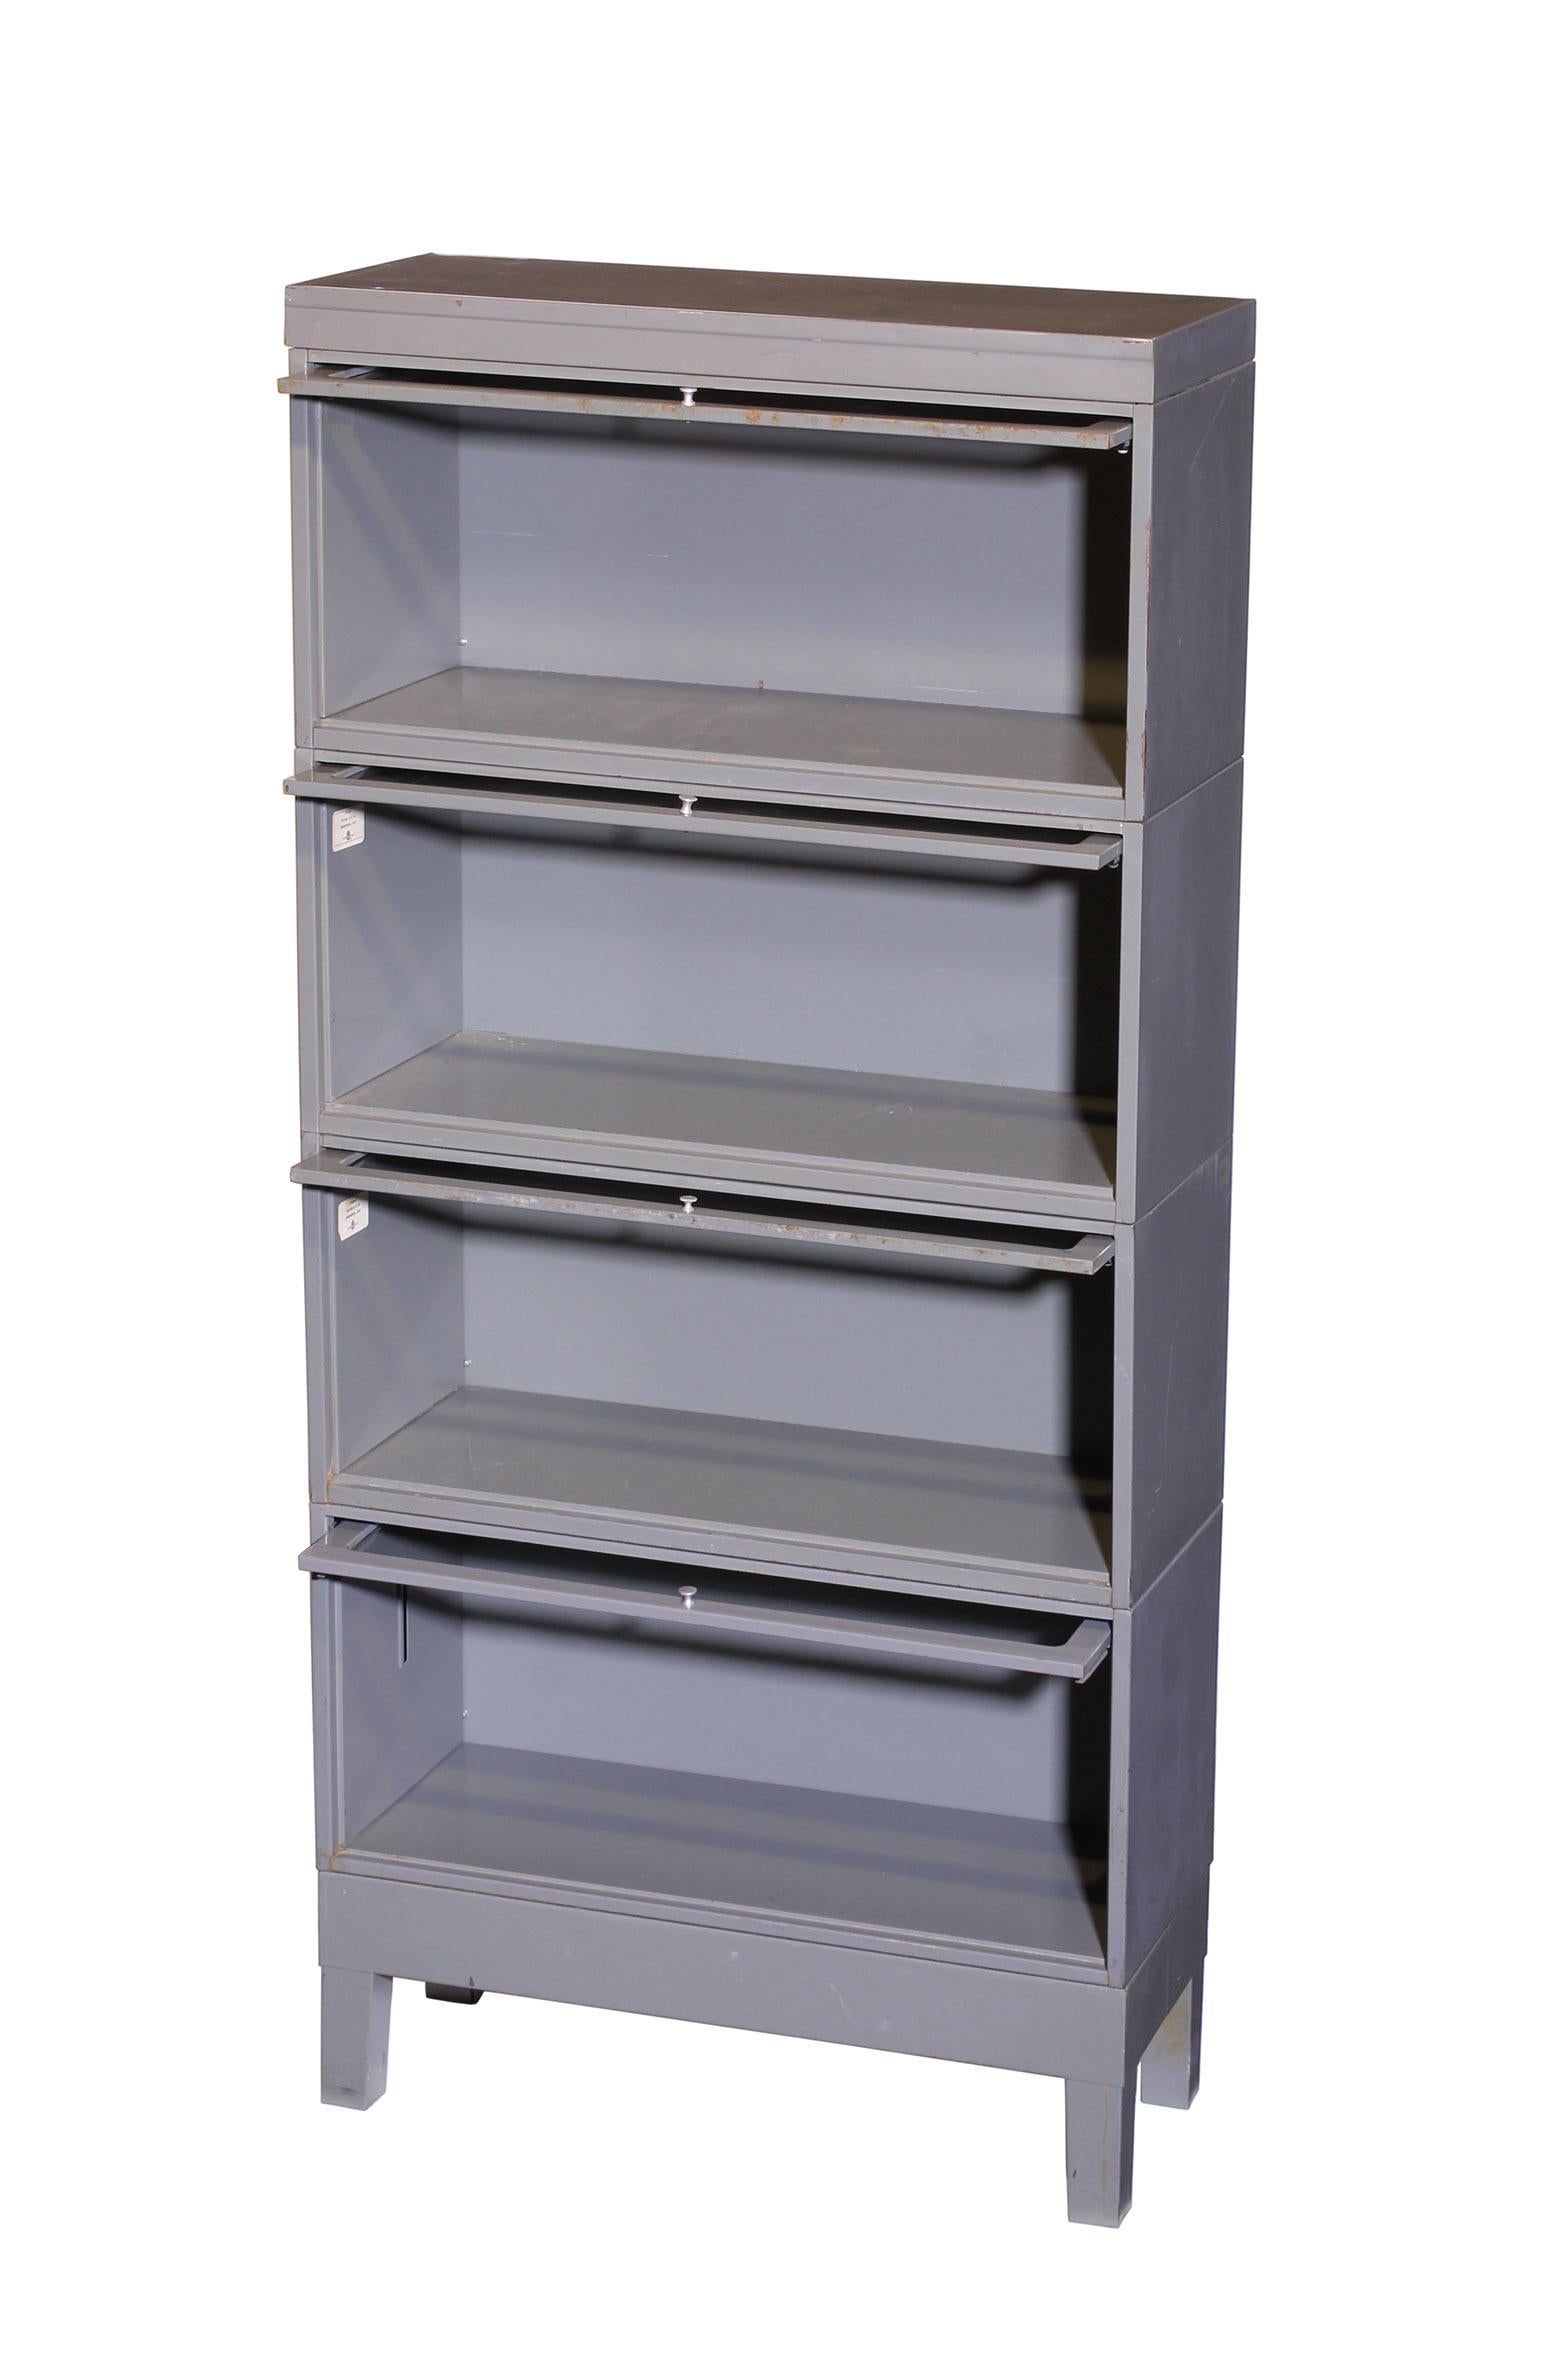 4-section, Globe Wernicke Barrister lawyers bookcase. In original gray paint with original glass. Very good condition with slight wear. Dimensions: Overall width 33.125